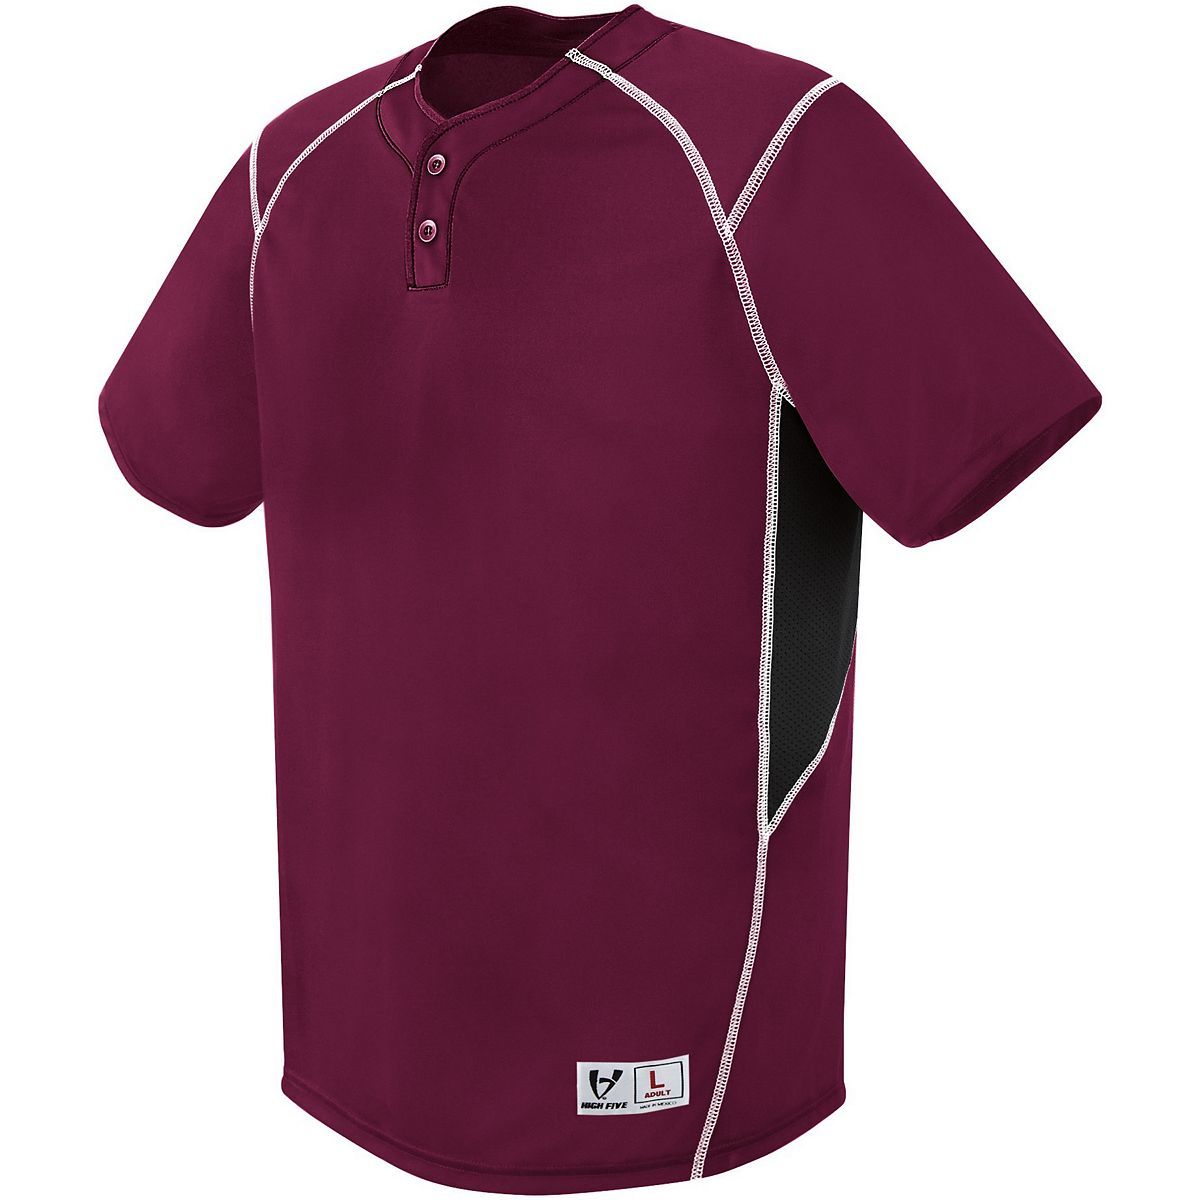 Augusta Sportswear Bandit Two-Button Jersey in Maroon/Black/White  -Part of the Adult, Adult-Jersey, Augusta-Products, Baseball, Shirts, All-Sports, All-Sports-1 product lines at KanaleyCreations.com